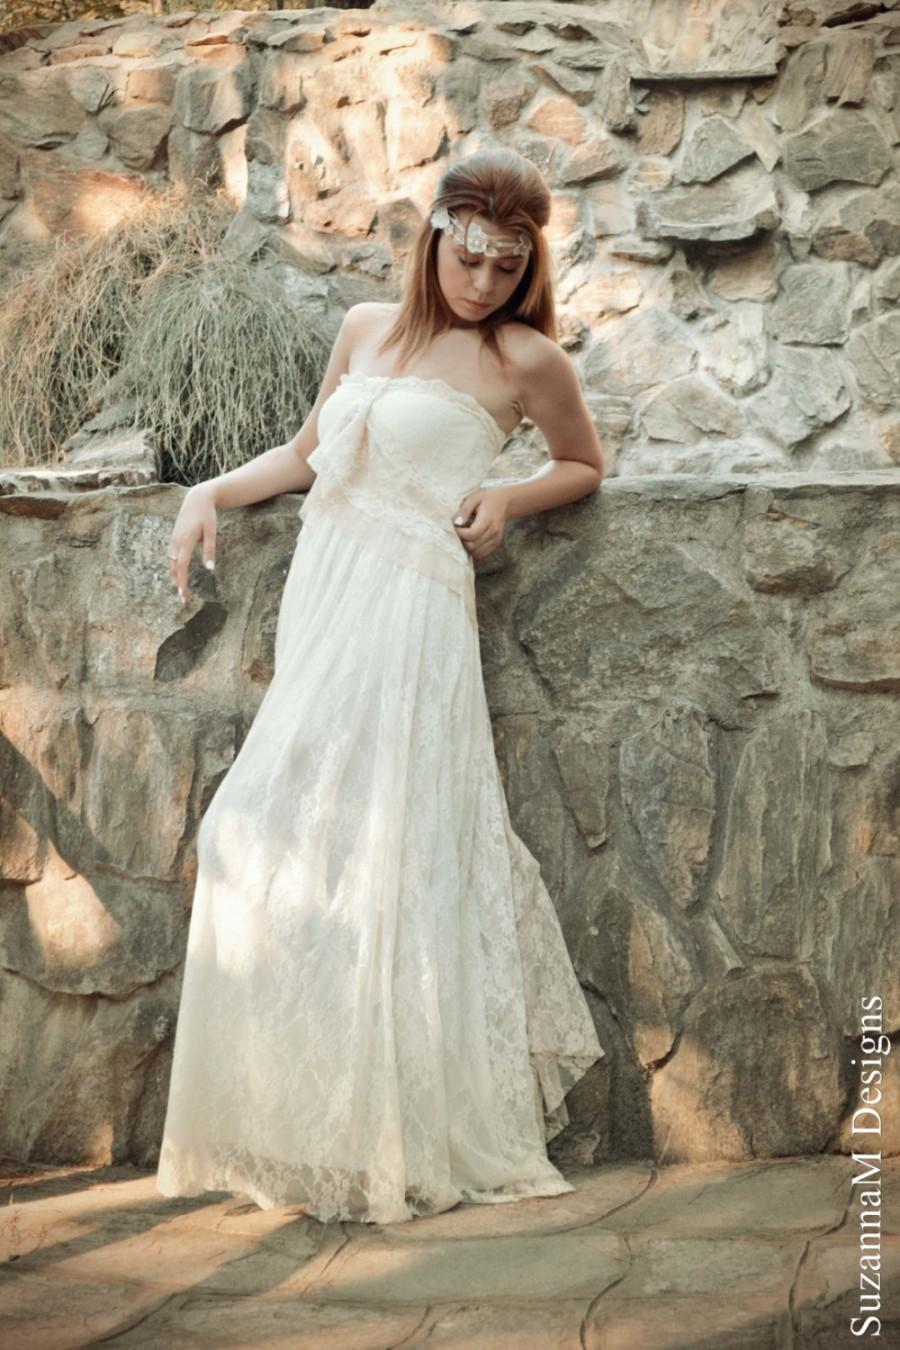 Hochzeit - Ivory Lace Bohemian Wedding Dress Long Strappless Bridal Wedding Retro Gown with Cream Lace Details - Handmade by SuzannaM Designs